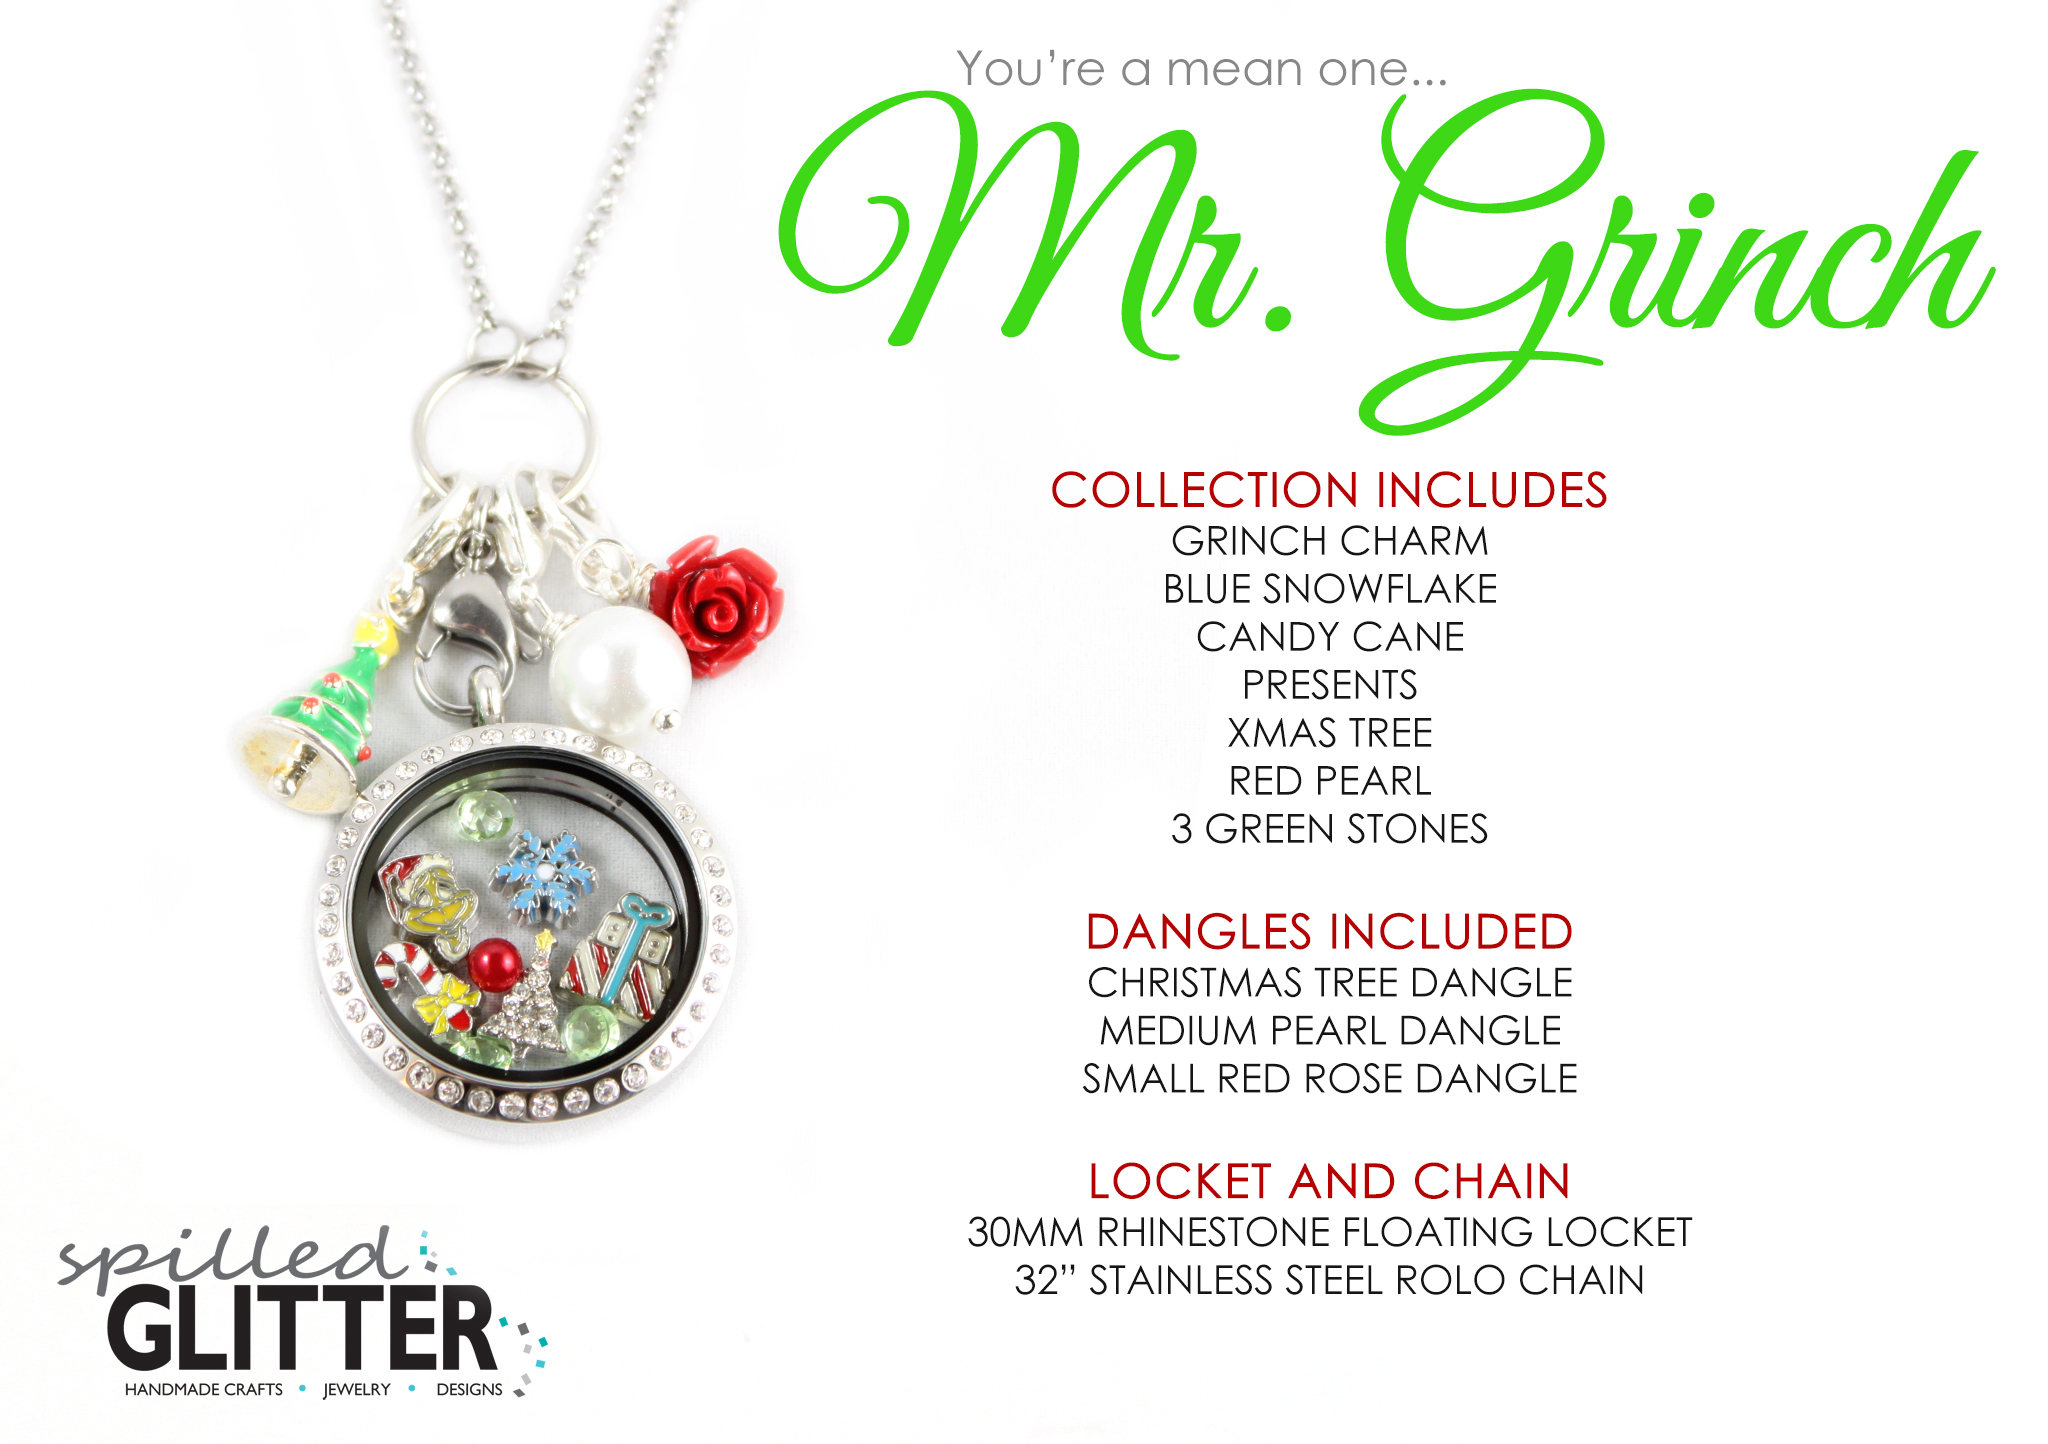 Cheap Origami Owl Charms Mr Grinch Christmas Holiday Floating Locket And Charm Collection